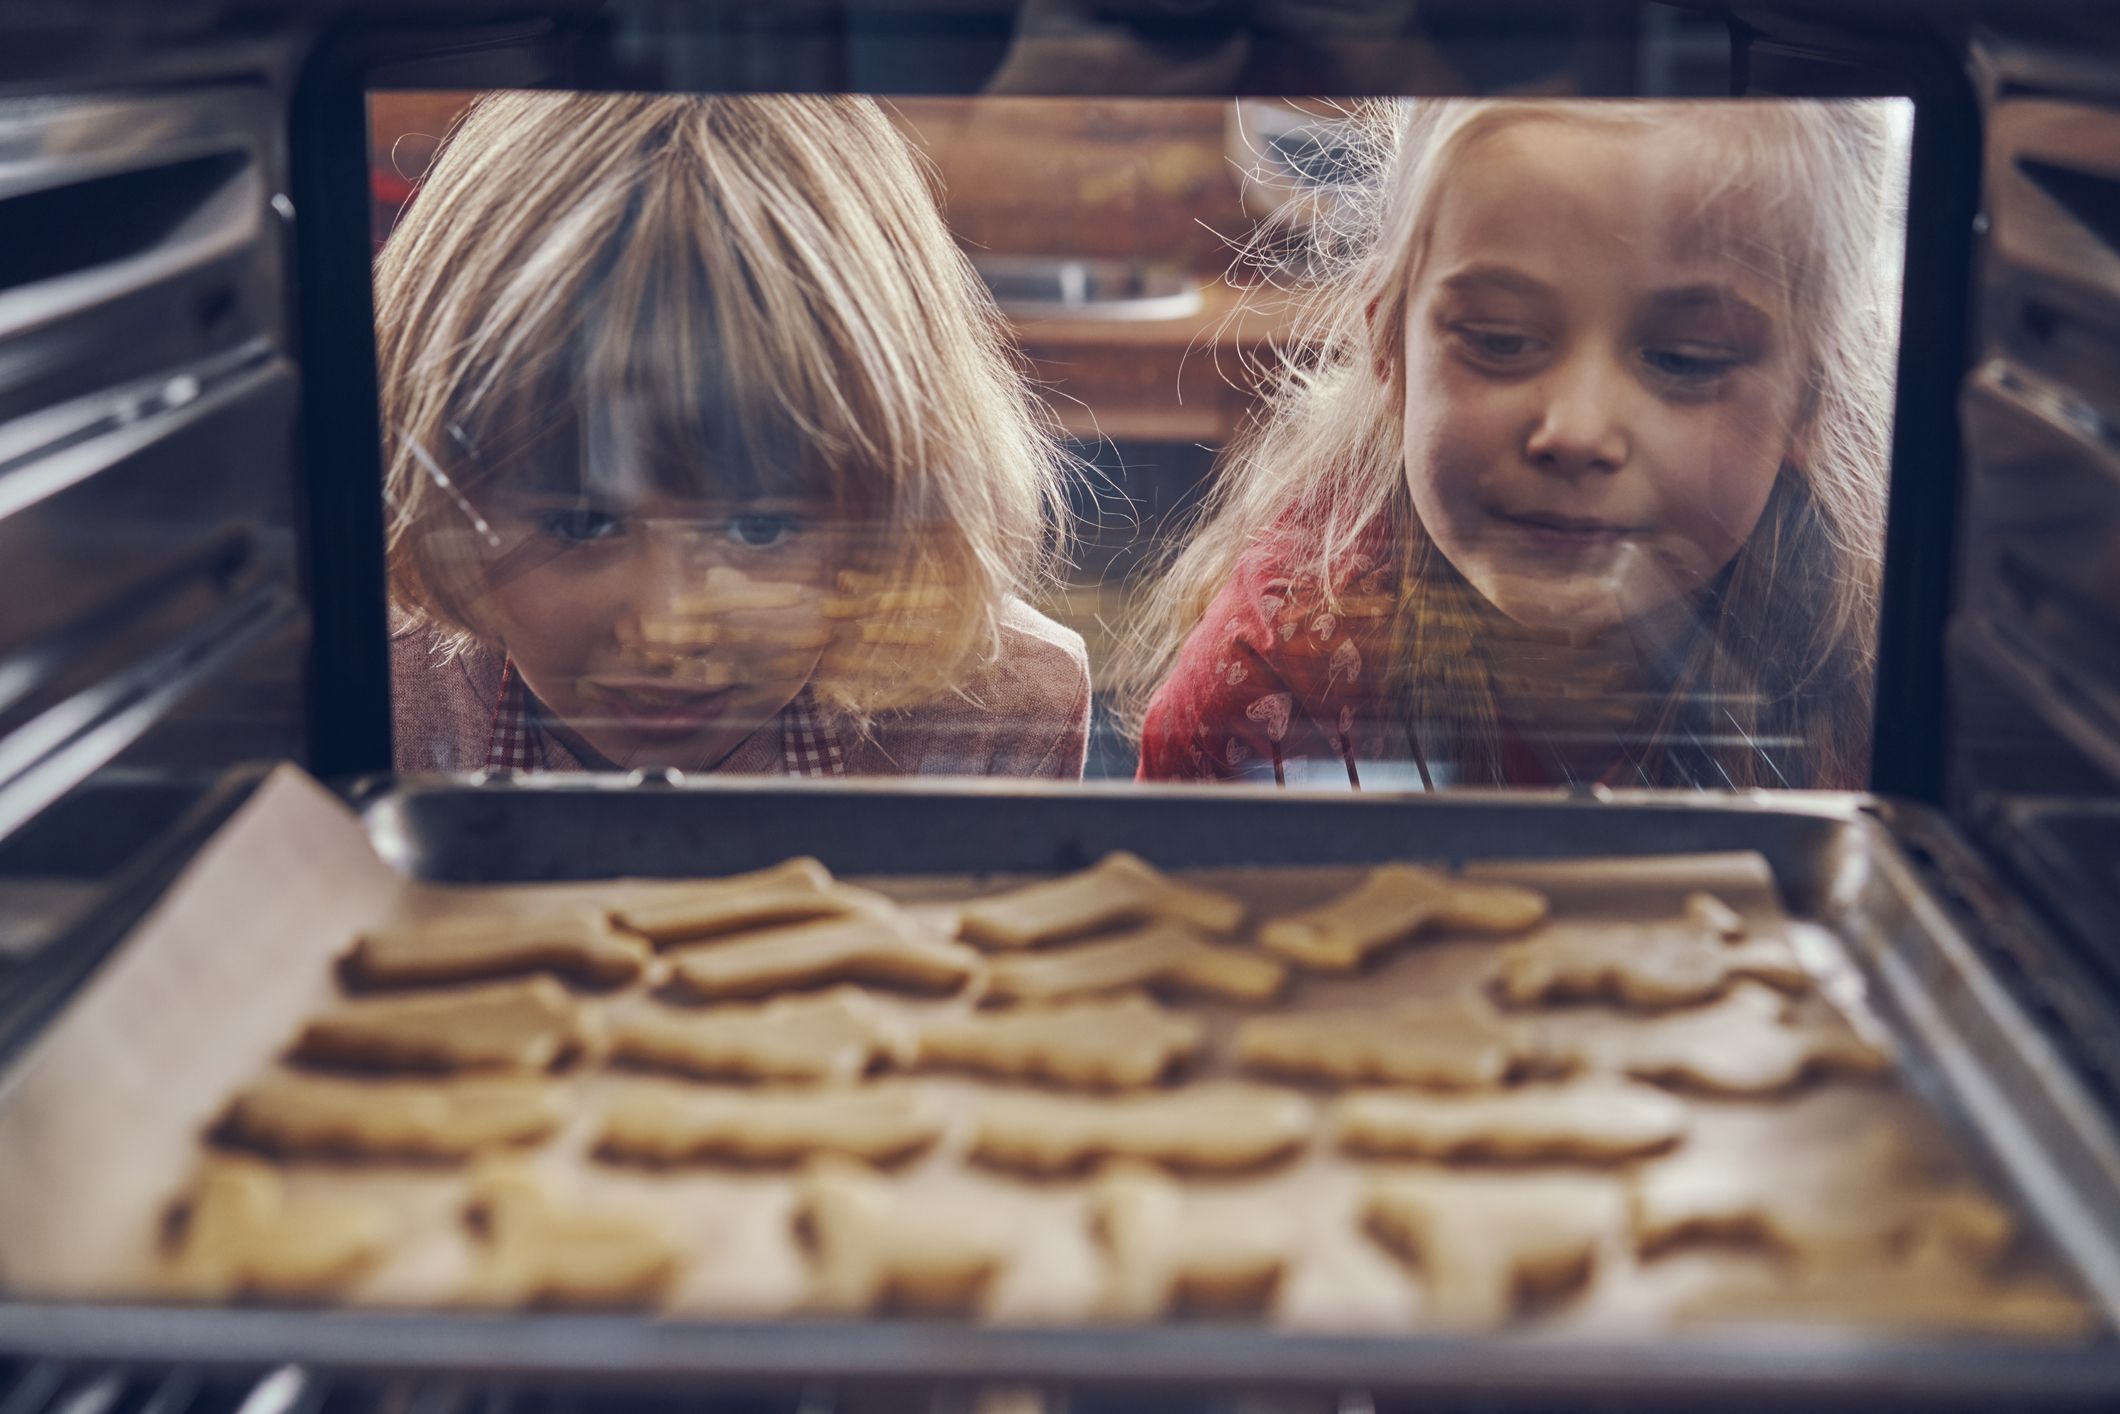 Two little girls watching and waiting for cookies to bake.